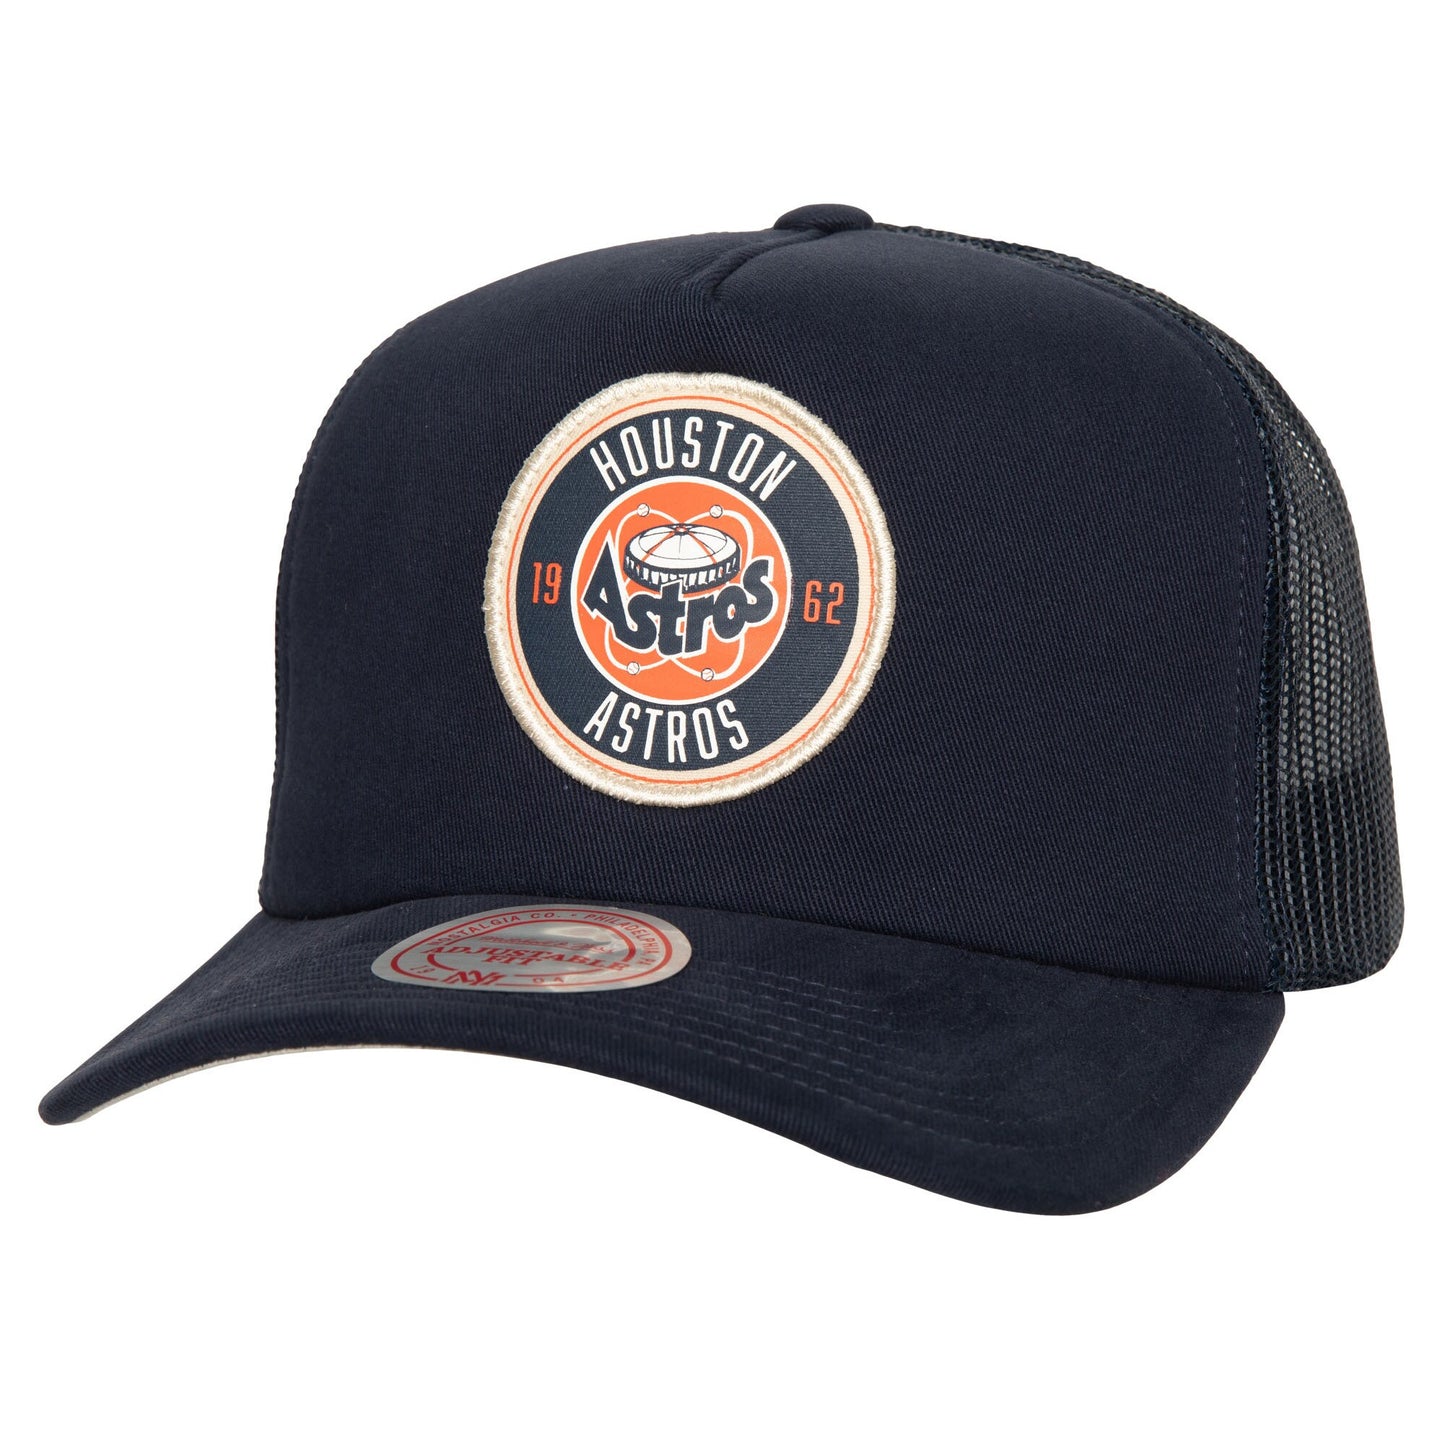 Houston Astros Mitchell & Ness Cooperstown Collection Circle Change Trucker Adjustable Hat - Navy